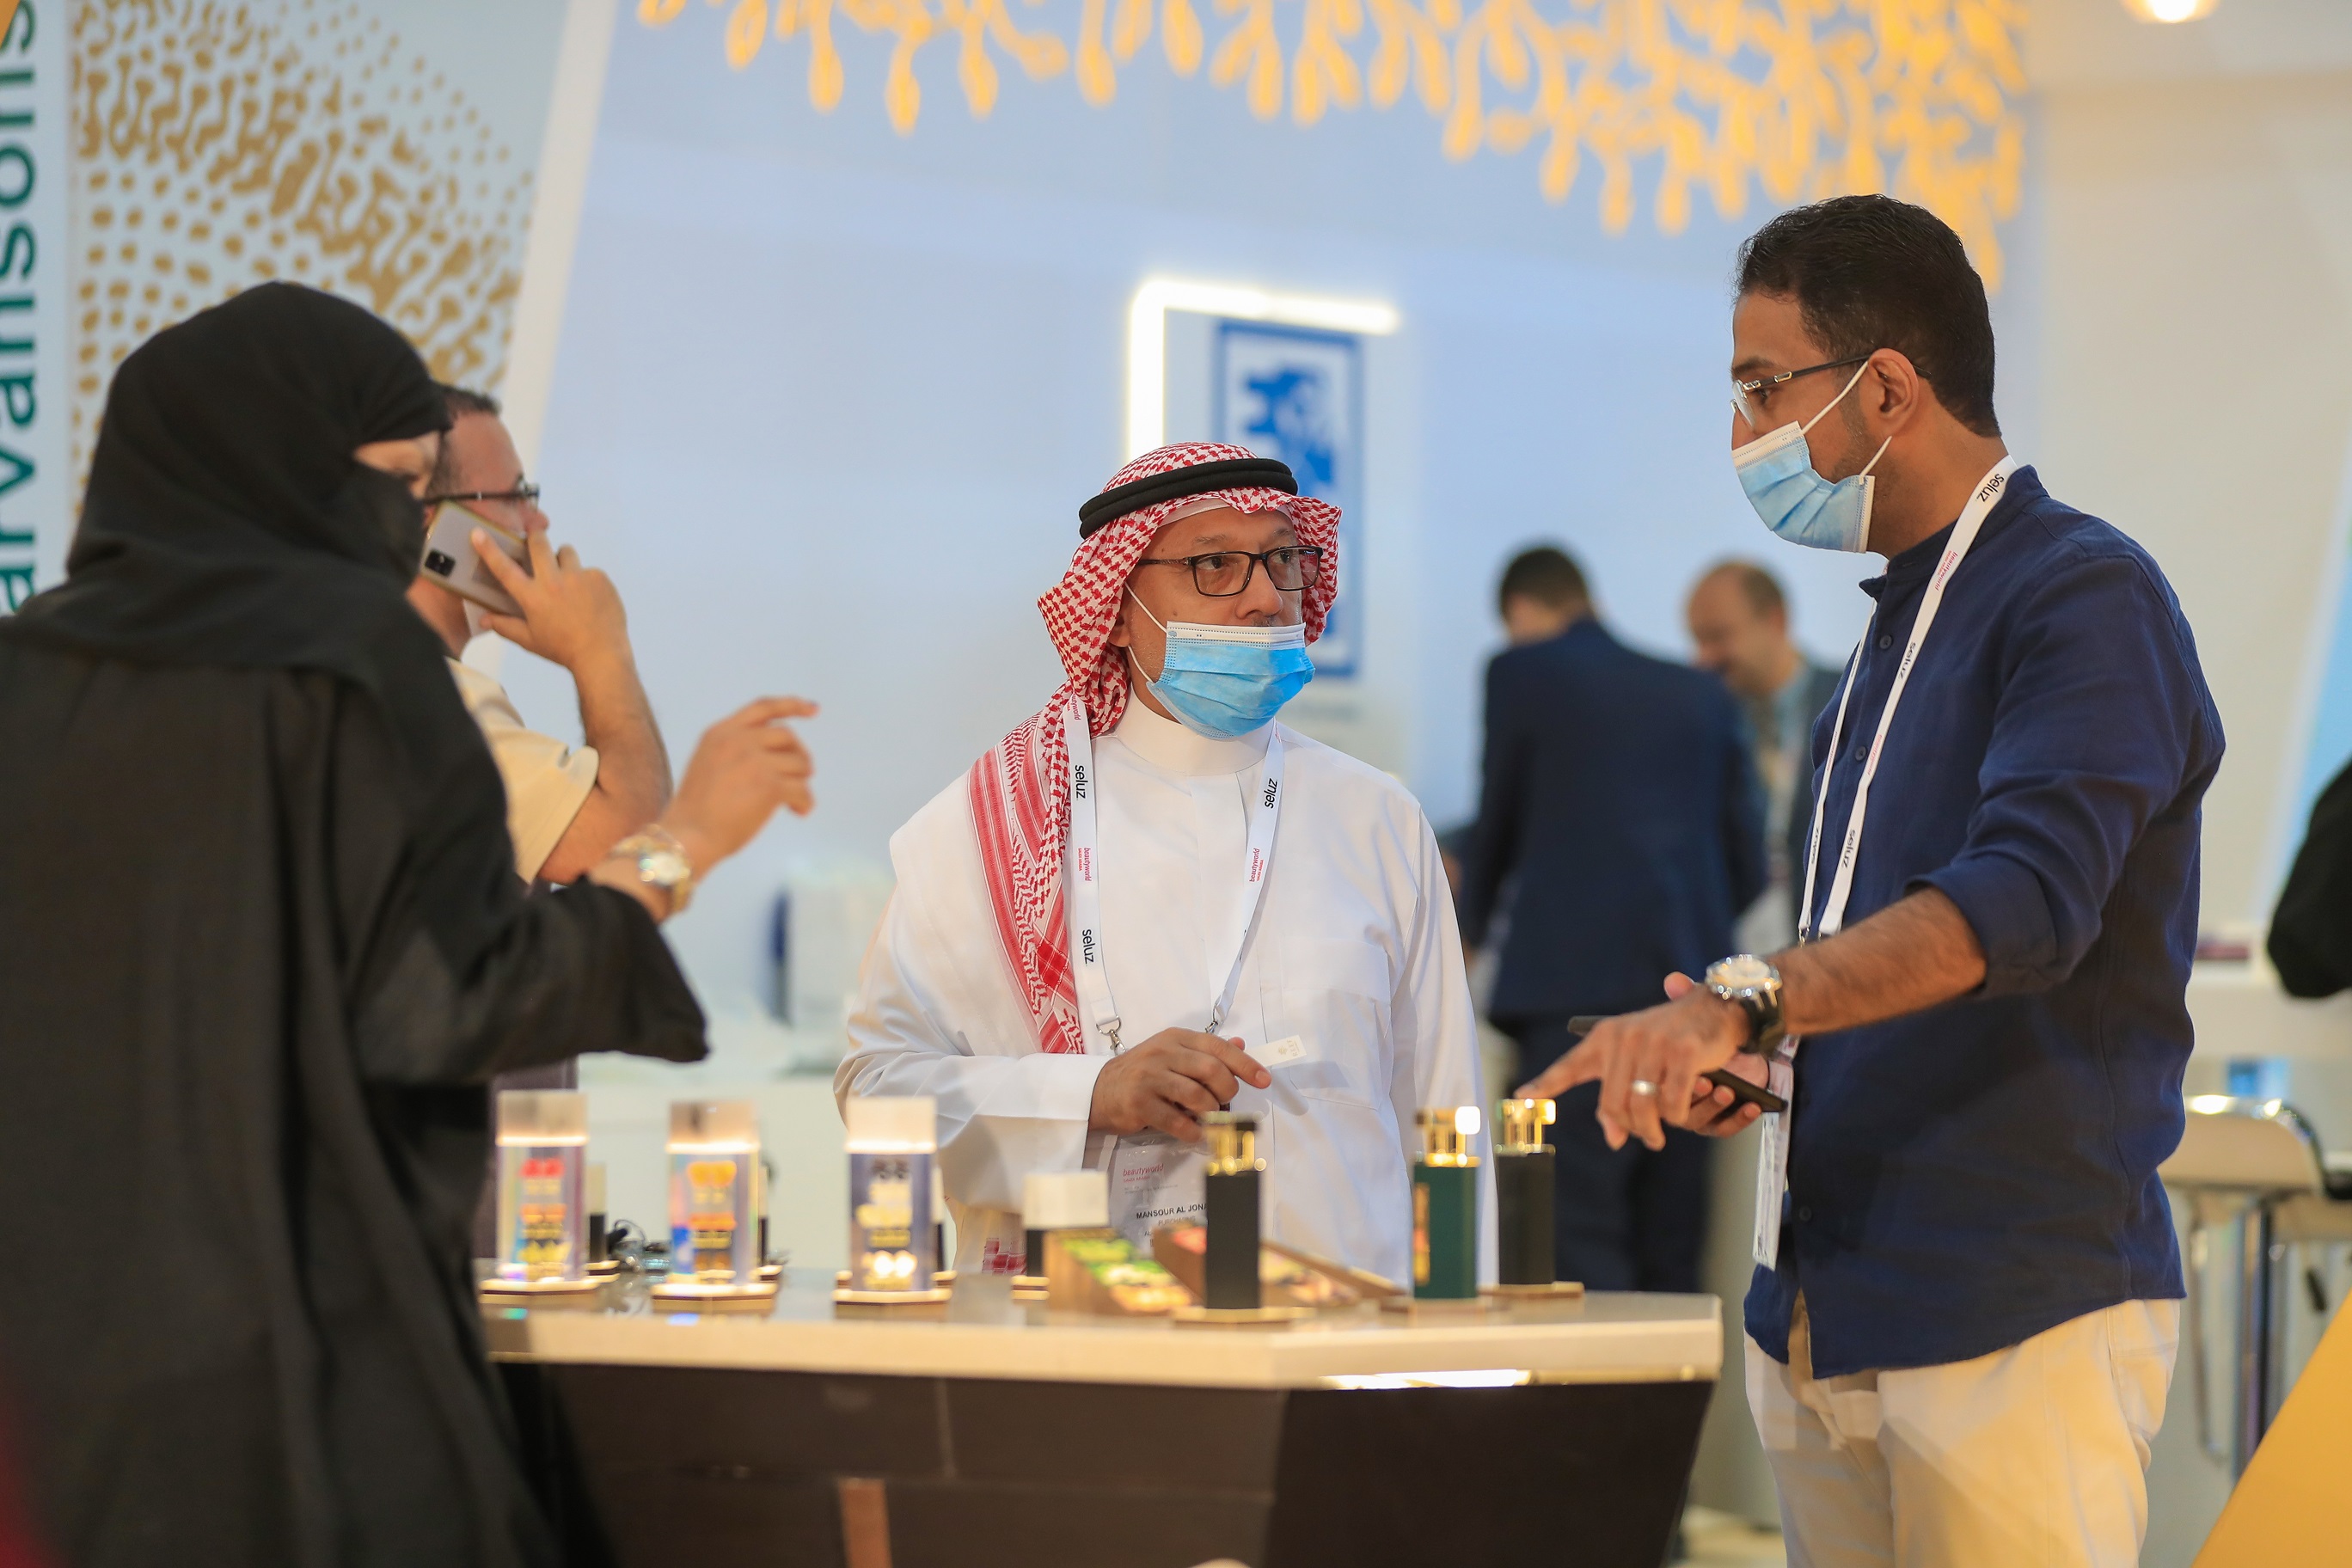 Saudis beauty and personal care market will top US$5-5 billion in retail value in 2022